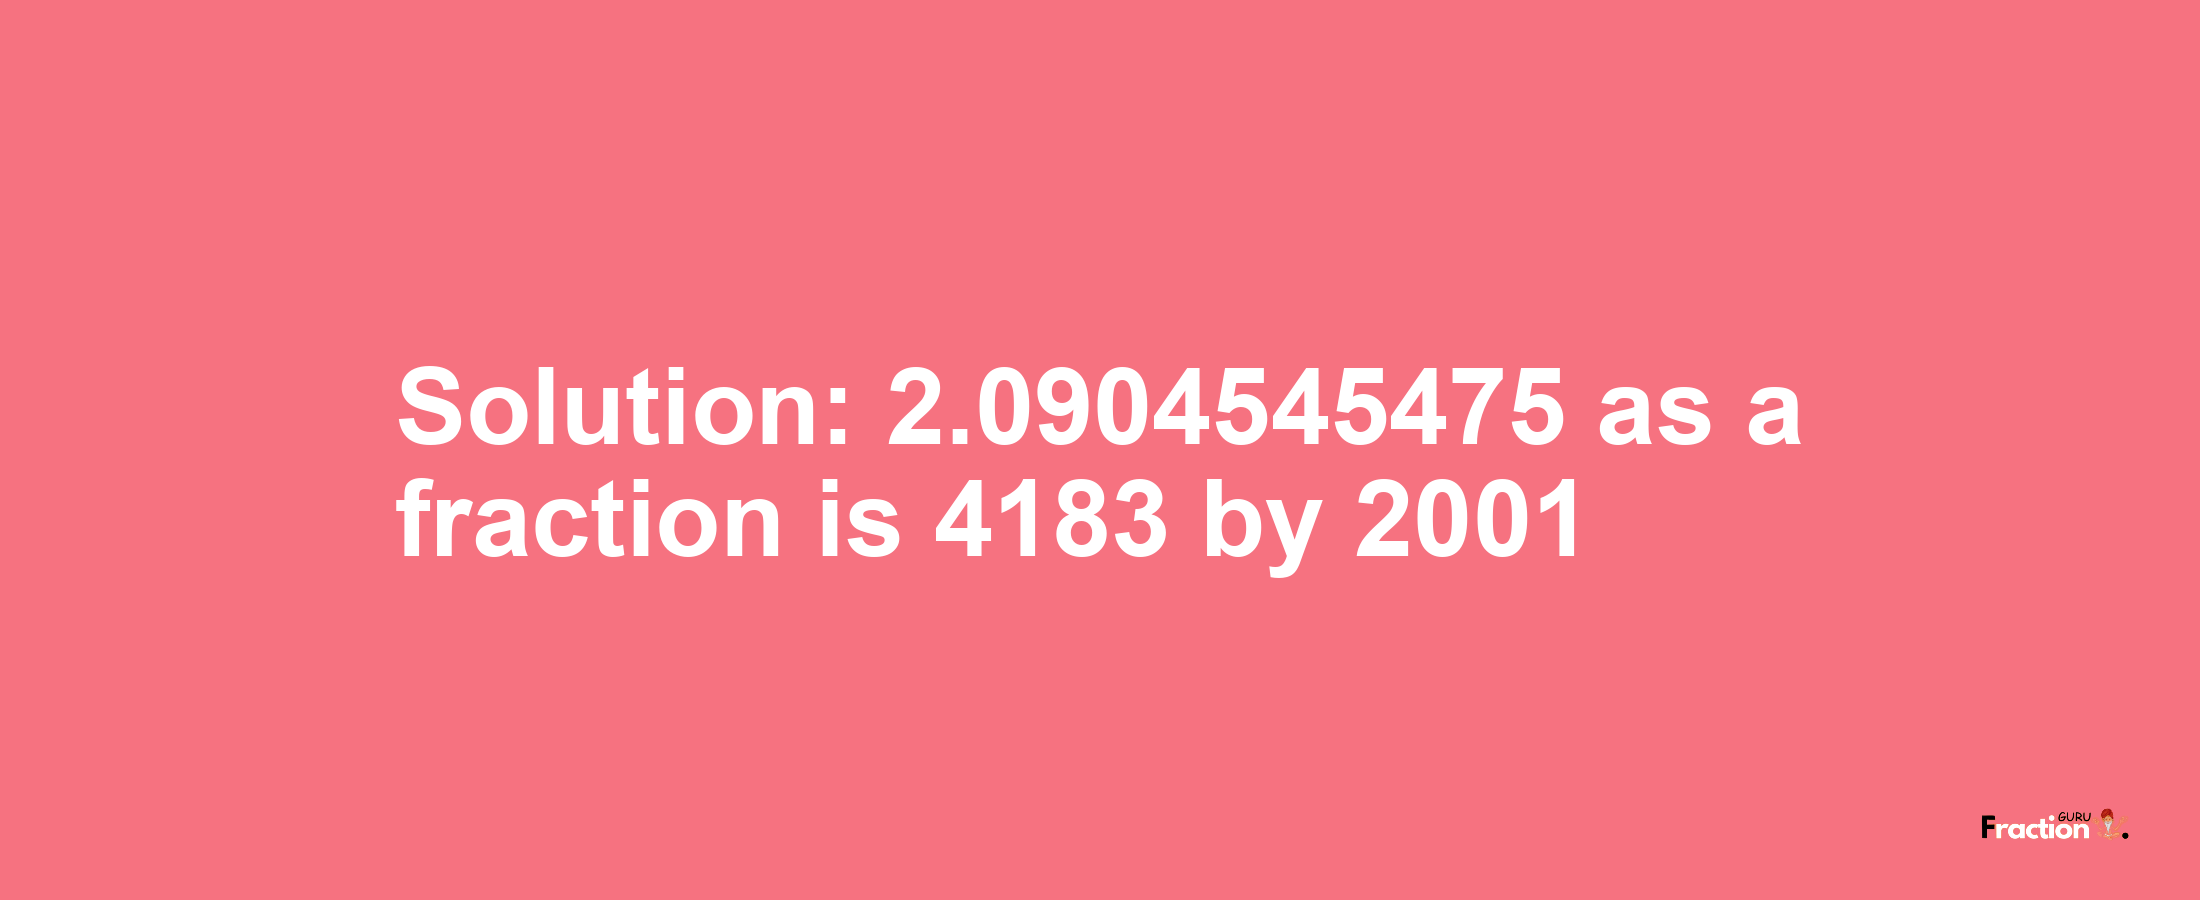 Solution:2.0904545475 as a fraction is 4183/2001